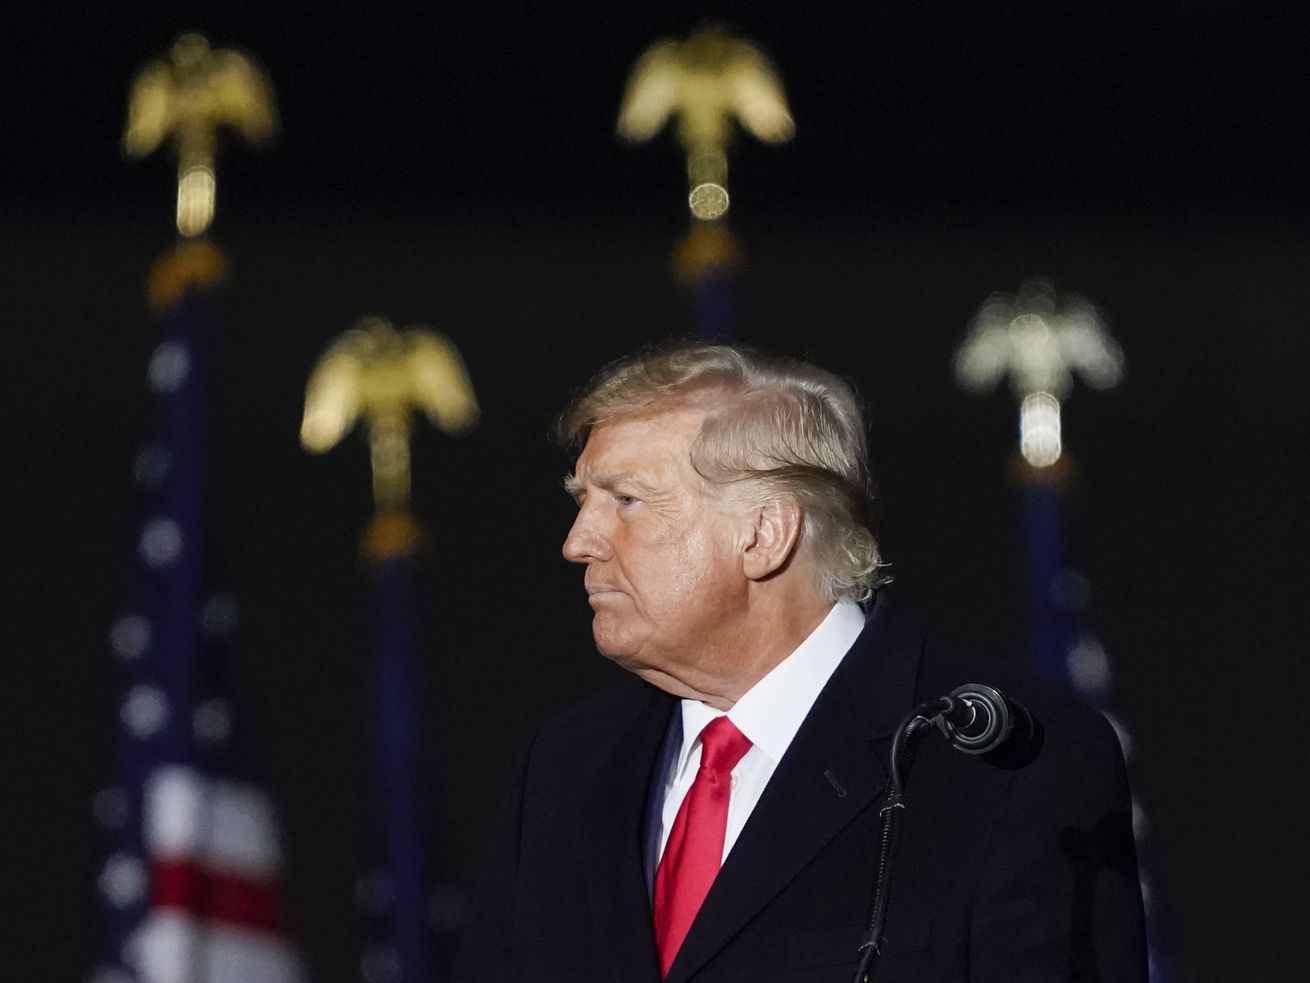 Trump in profile facing left, with American flags in the background. 